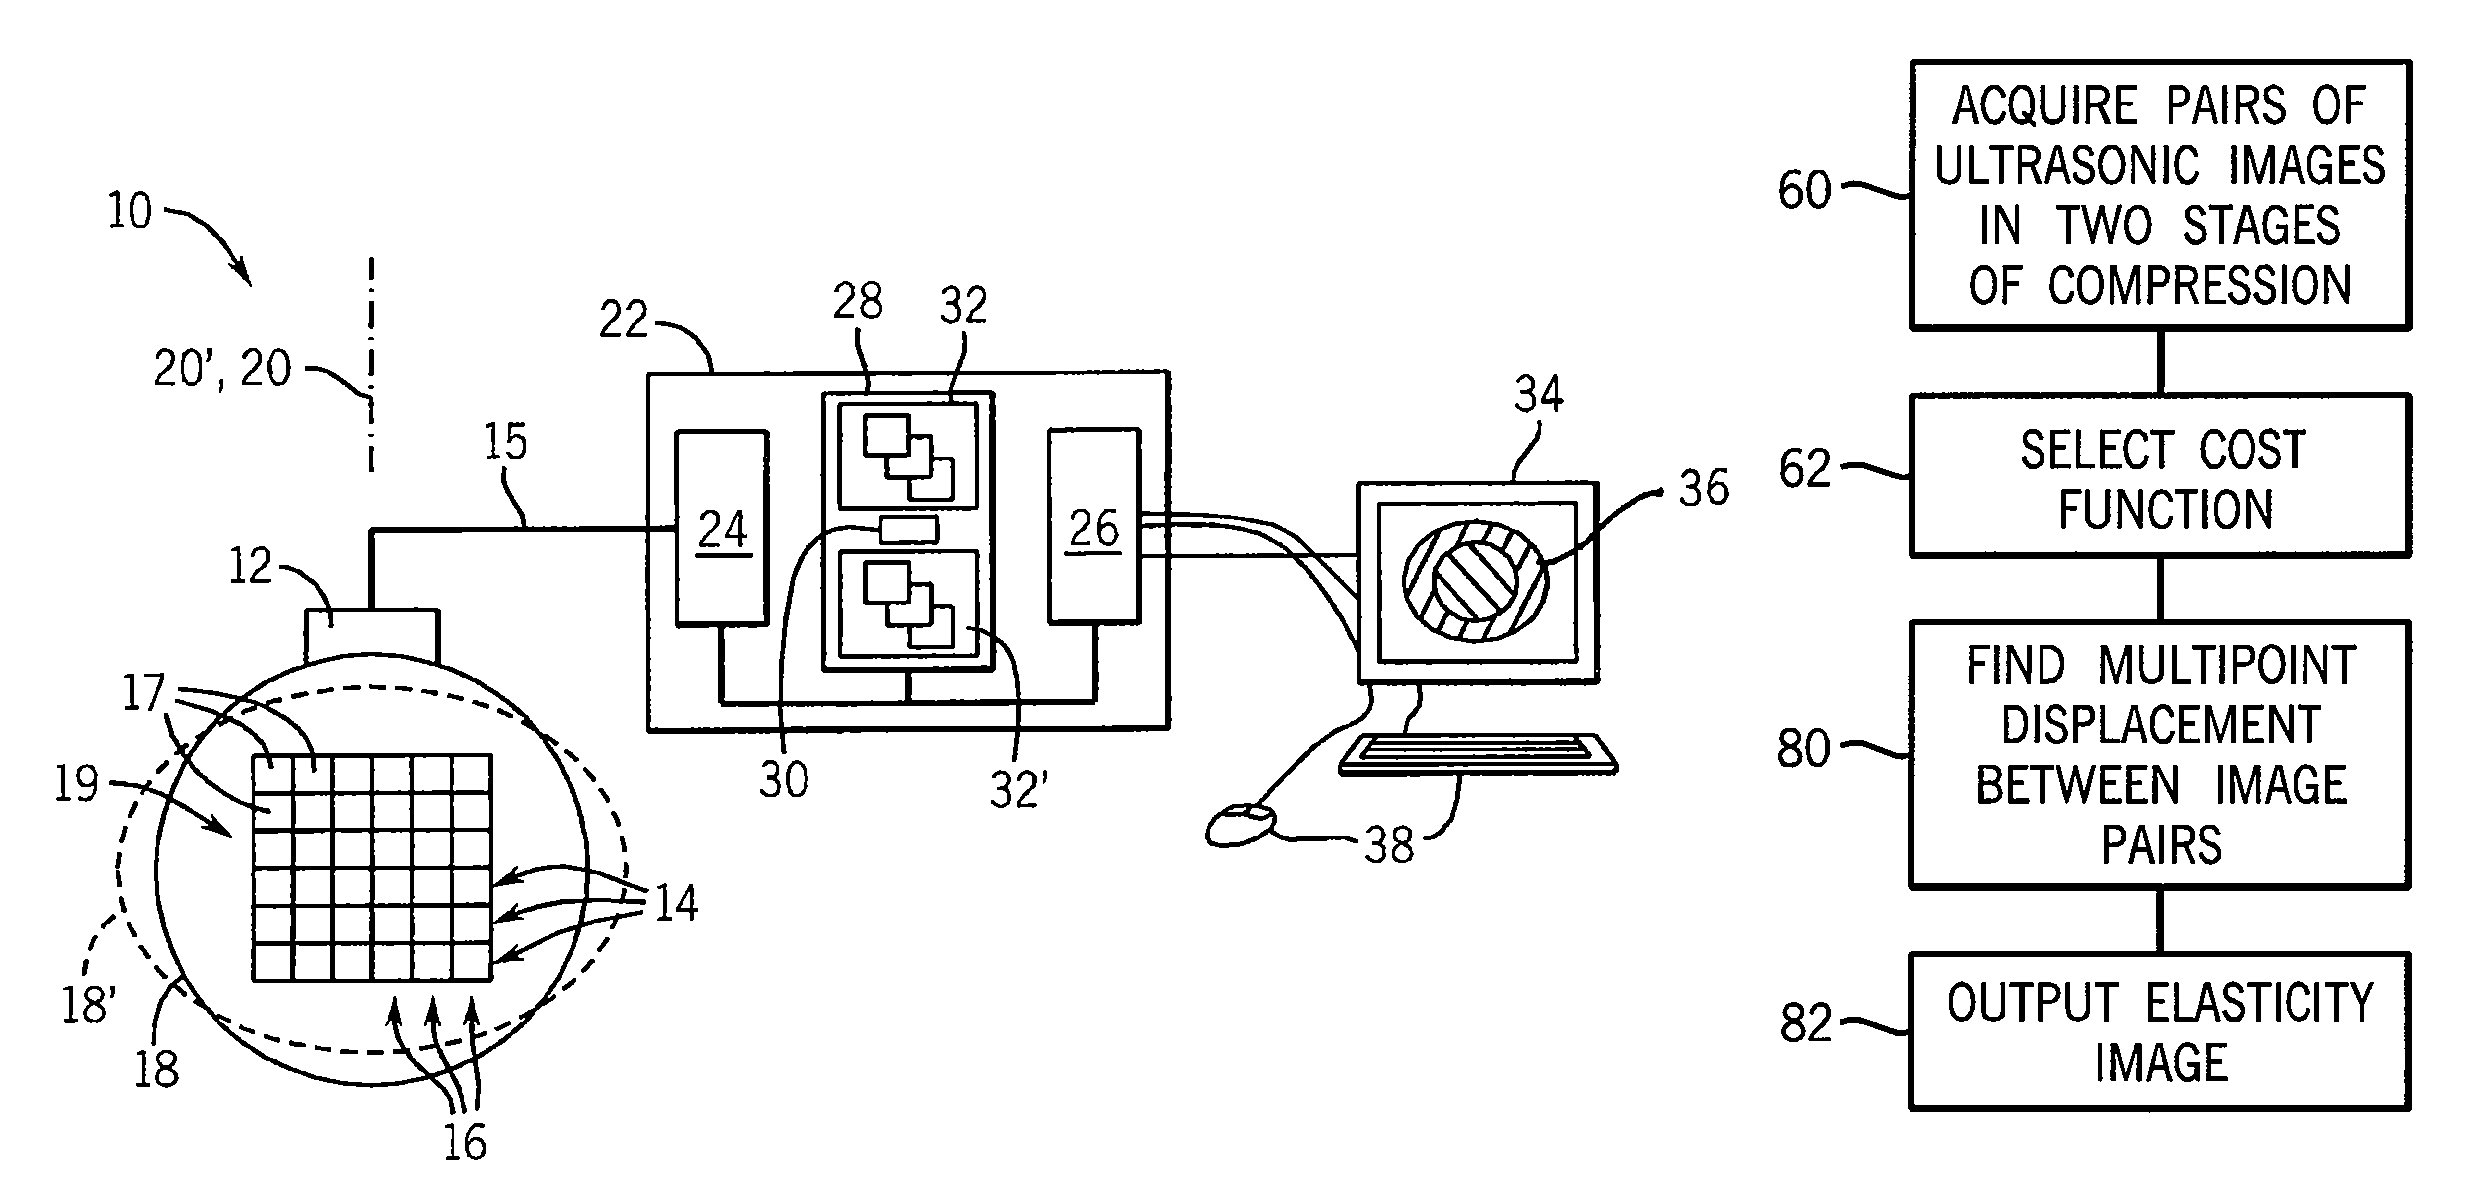 Ultrasonic strain imaging device with selectable cost-function